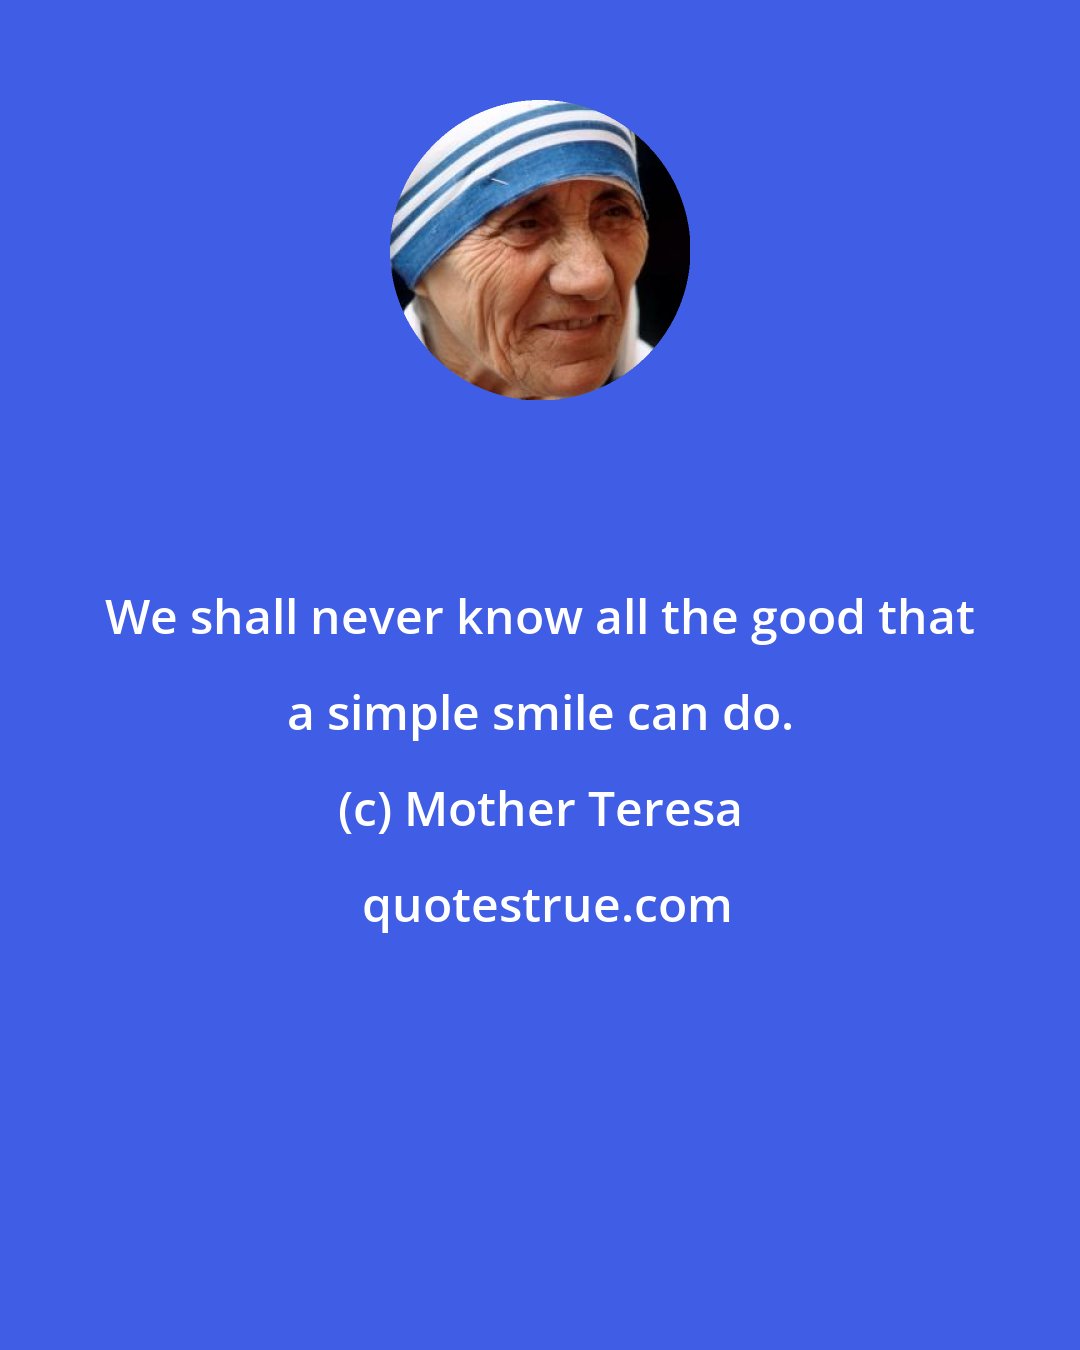 Mother Teresa: We shall never know all the good that a simple smile can do.